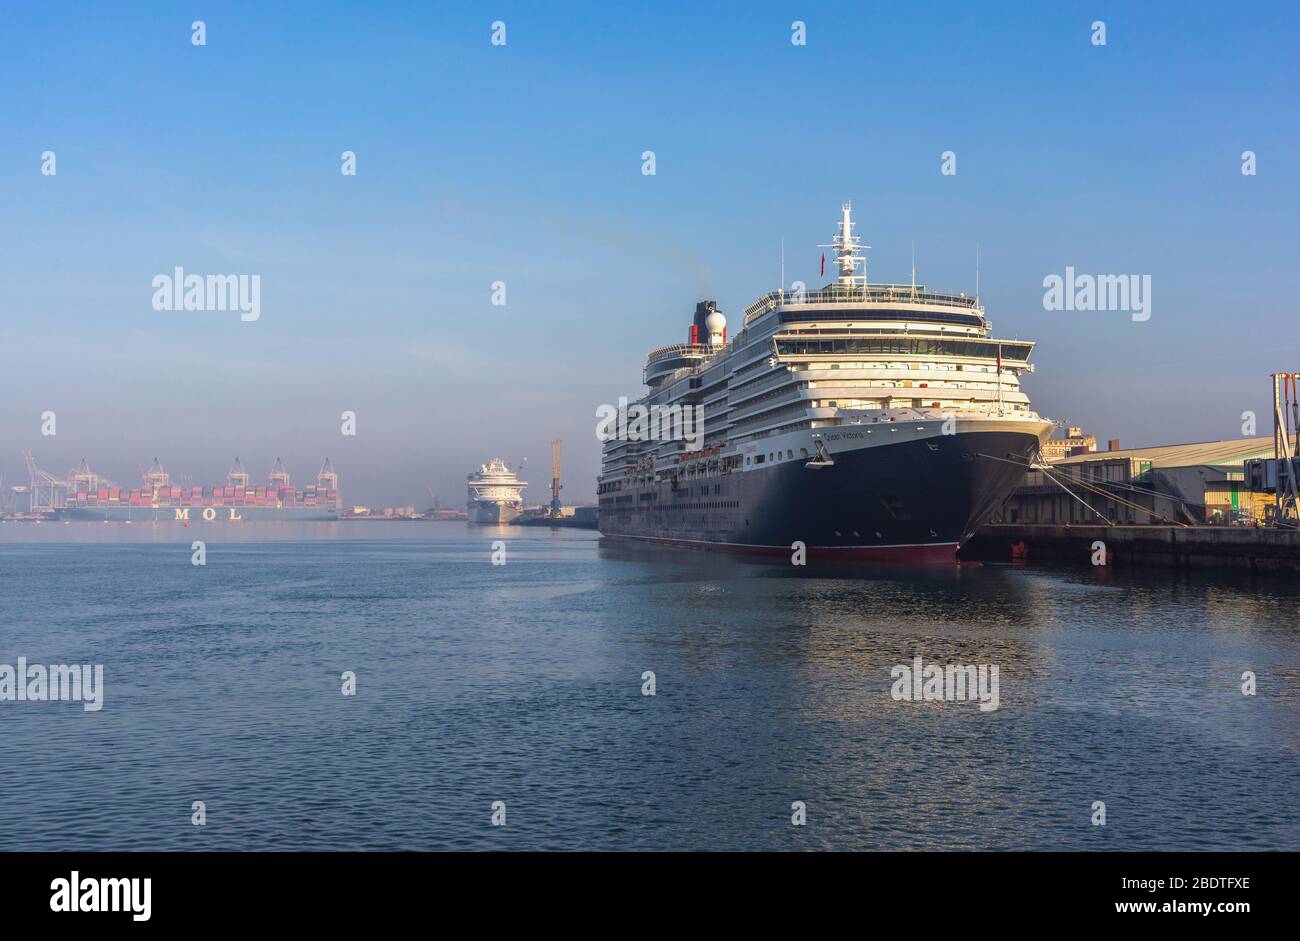 The Queen Victoria cruise ship one of Cunard's flagship liner docked at Southampton City Cruise Terminal Berth 101 during the Coronavirus lockdown unable to be in operation due to the ongoing Covid-19 pandemic in 2020, Southampton, England, UK Stock Photo